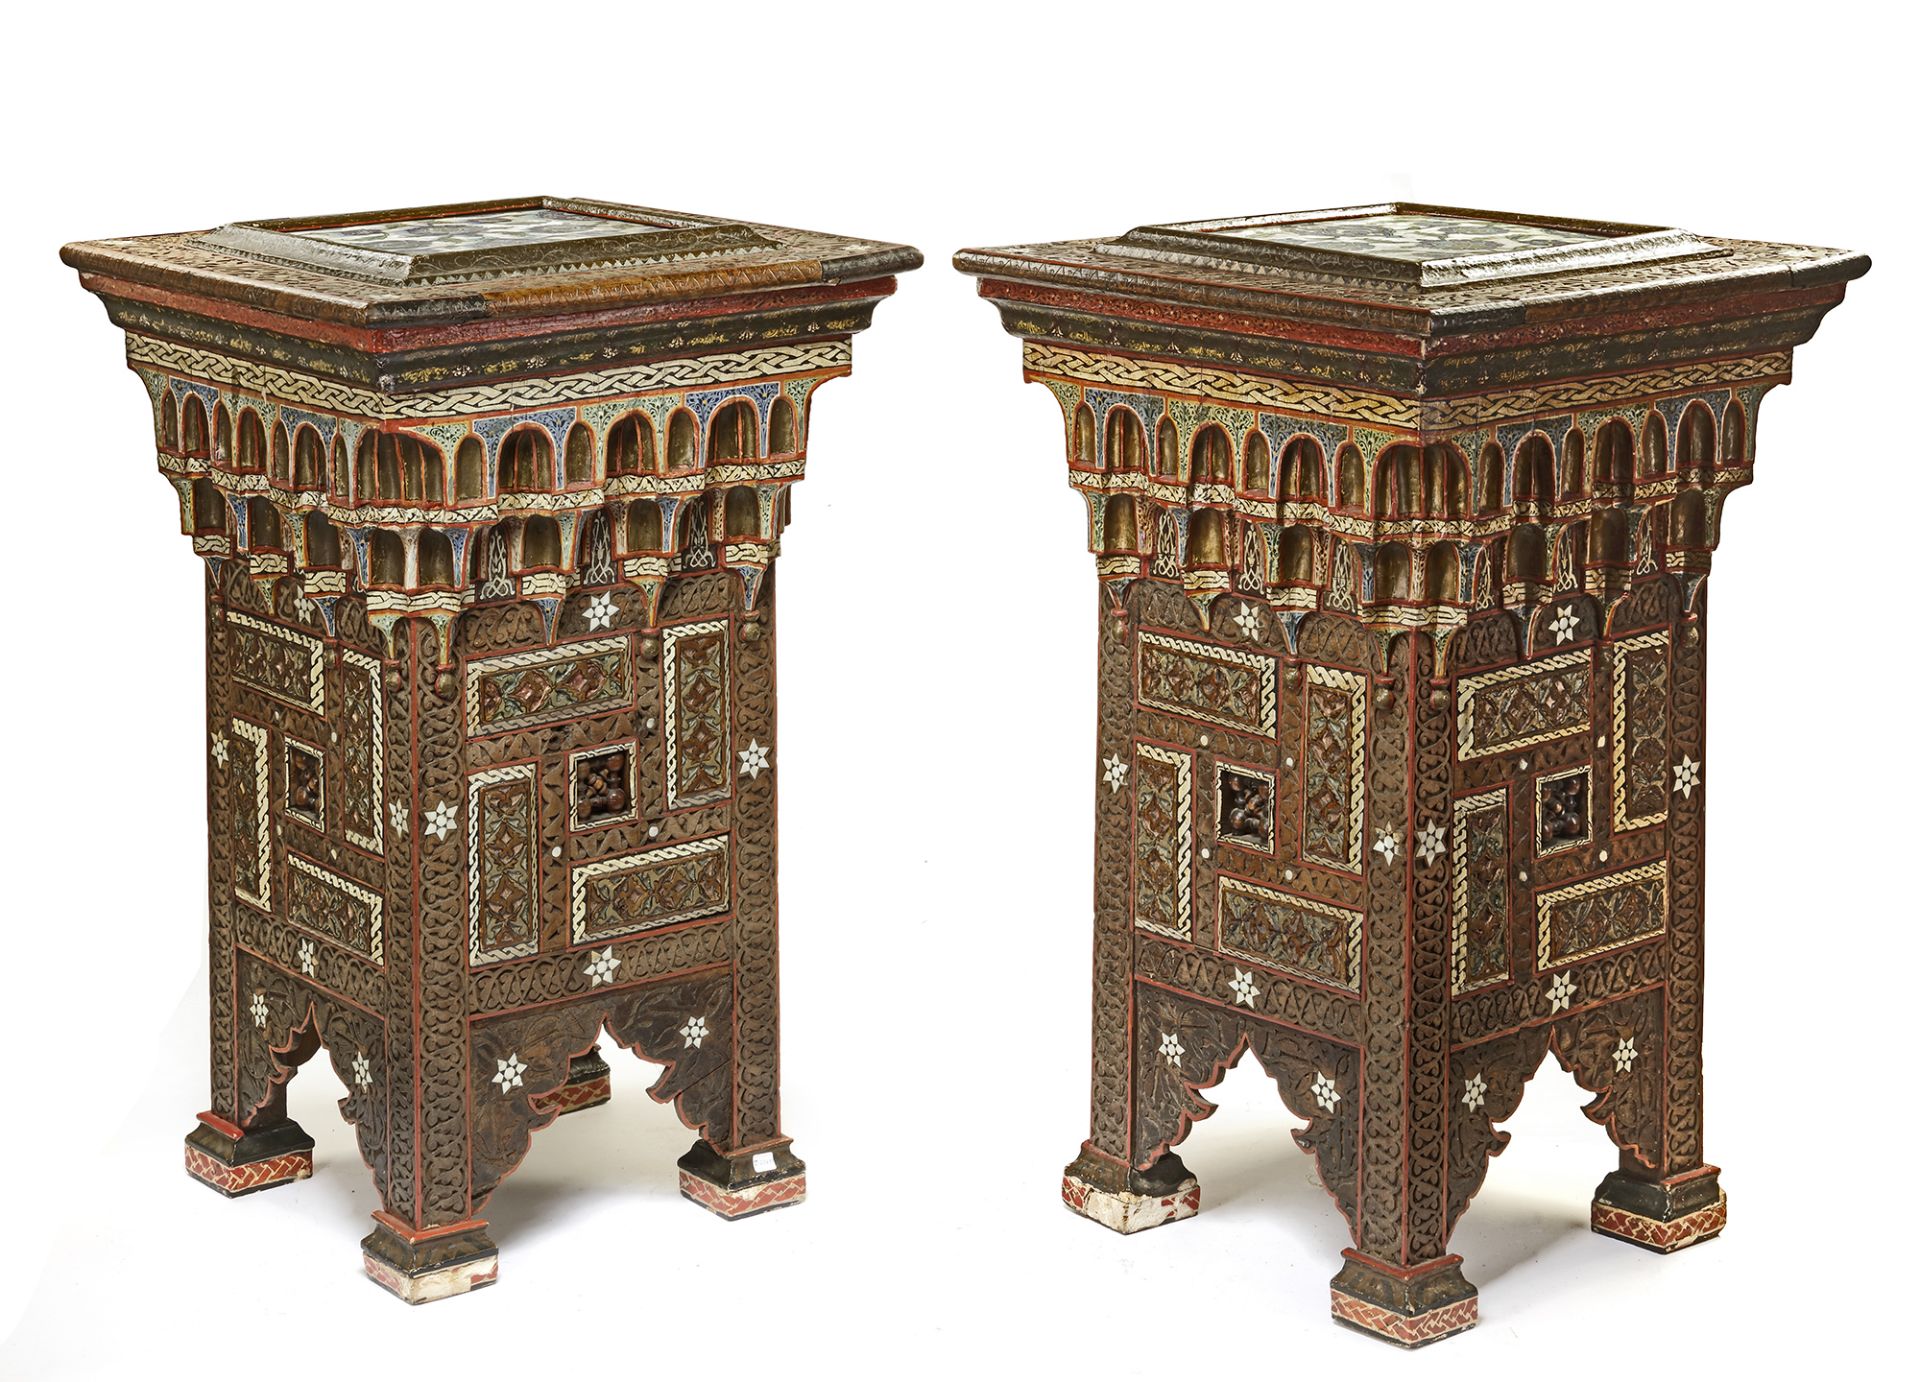 A PAIR OF DAMASCUS BONE-INLAID PAINTED WOOD PLANT STANDS INLAID WITH DAMASCUS POTTERY TILES, SYRIA, - Image 6 of 10